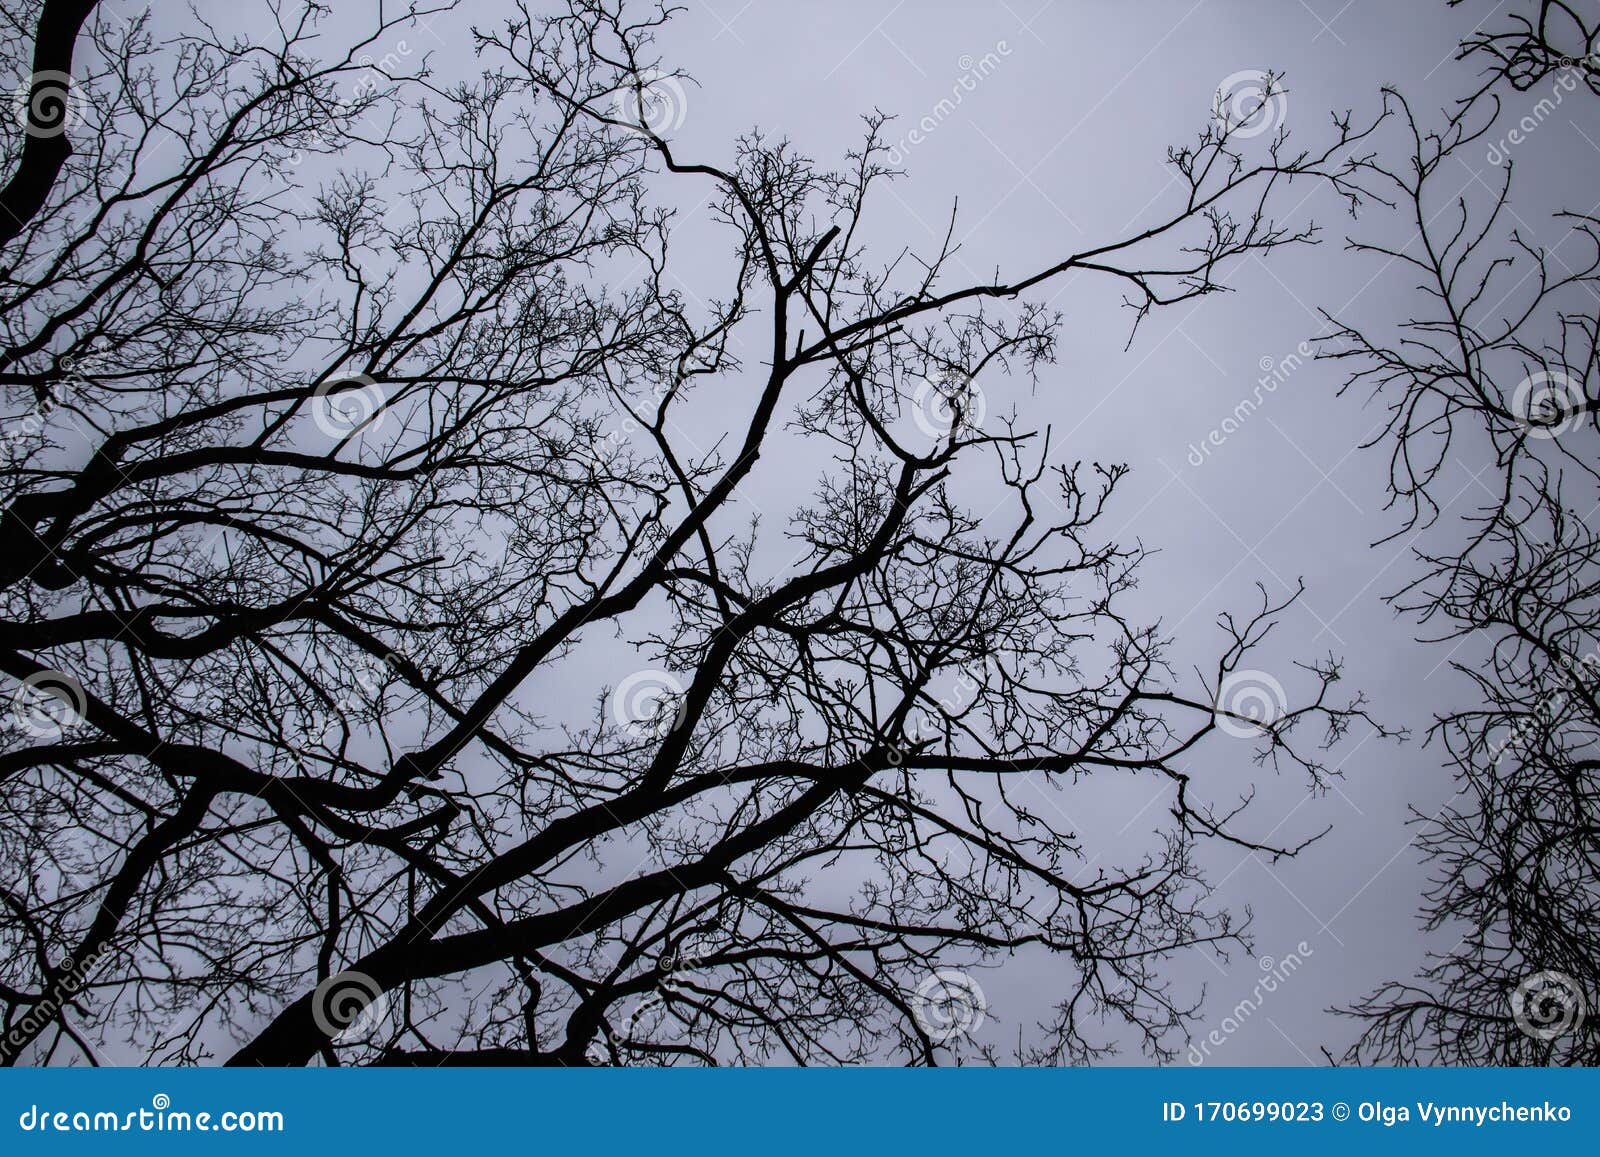 A Tree Branches On The Grey Sky. A Mainly Gloomy Cloudy 